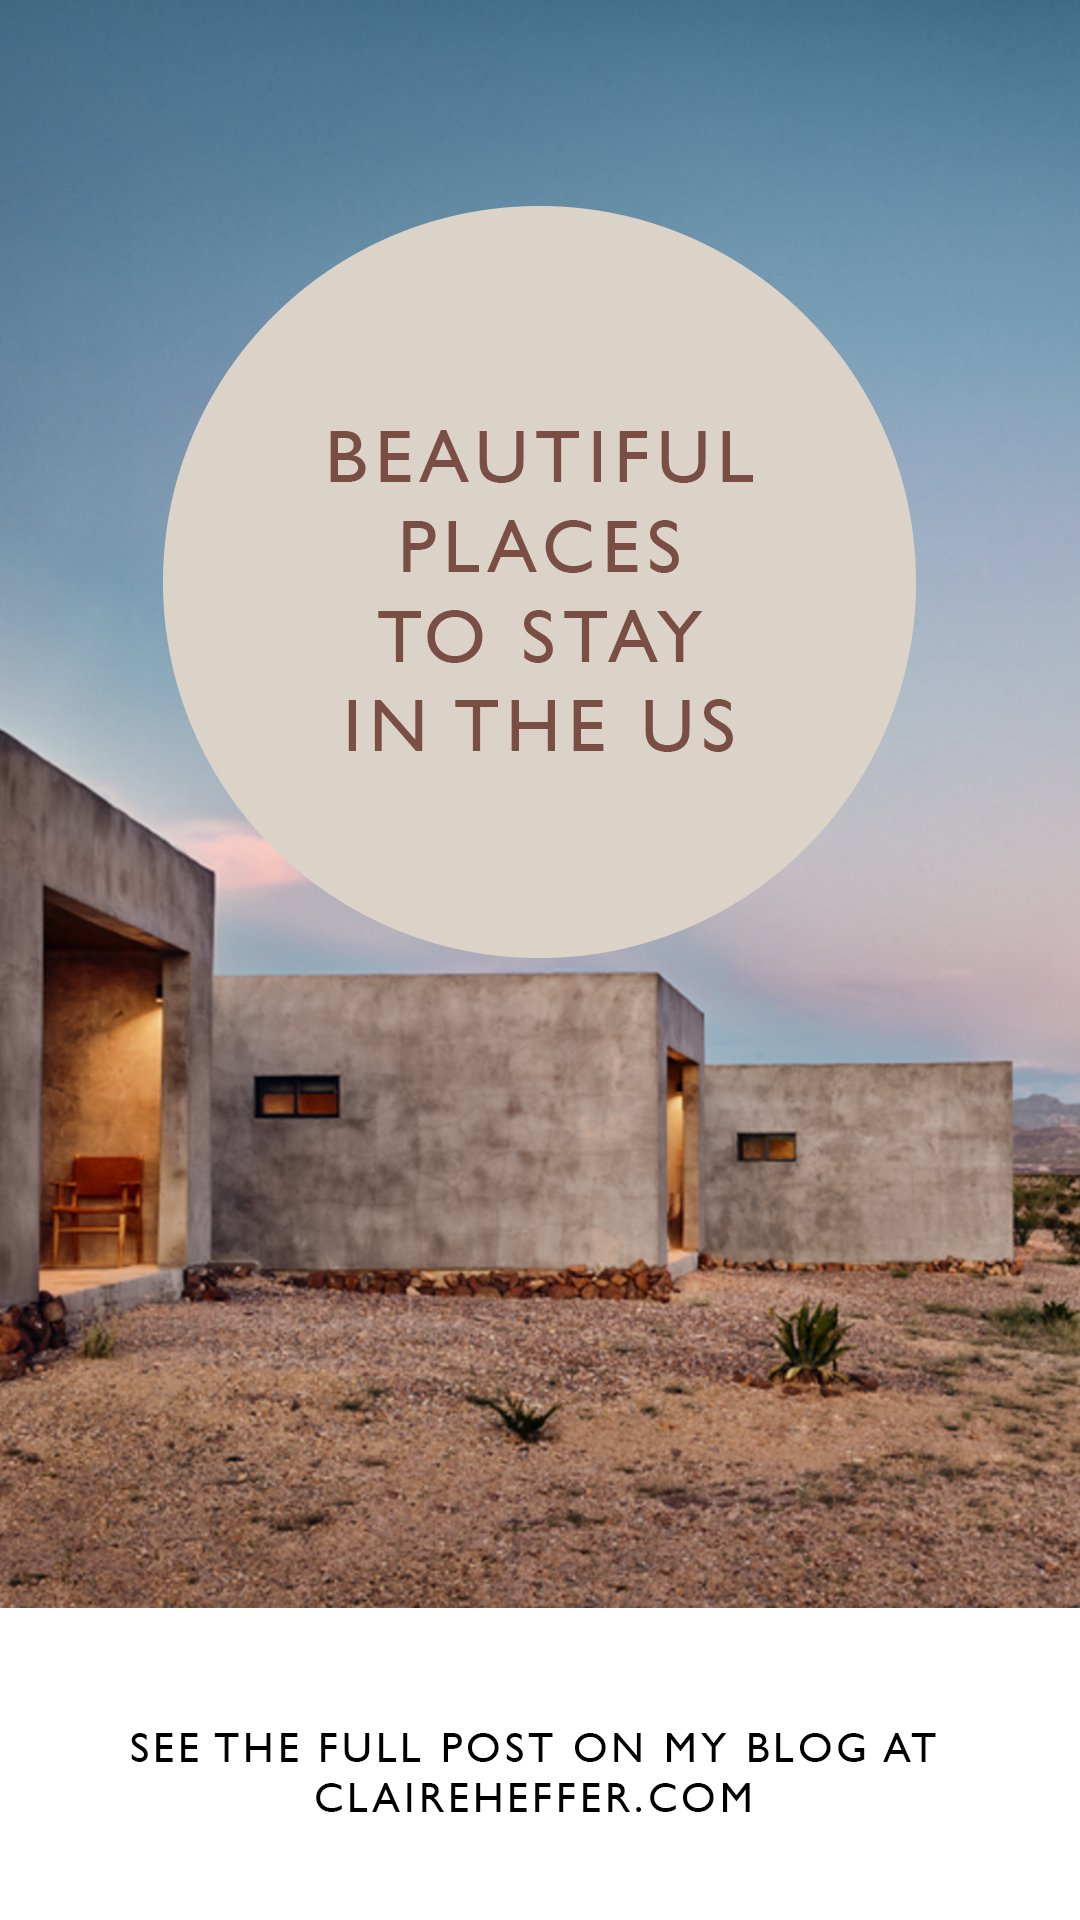 Focus On: Wanderlust, Holiday Travel Inspiration,  Vacation Travel Inspiration,  Vacation Inspiration, I Share With You The Best Places I’ve Been, Amazing Things To Experience All Over